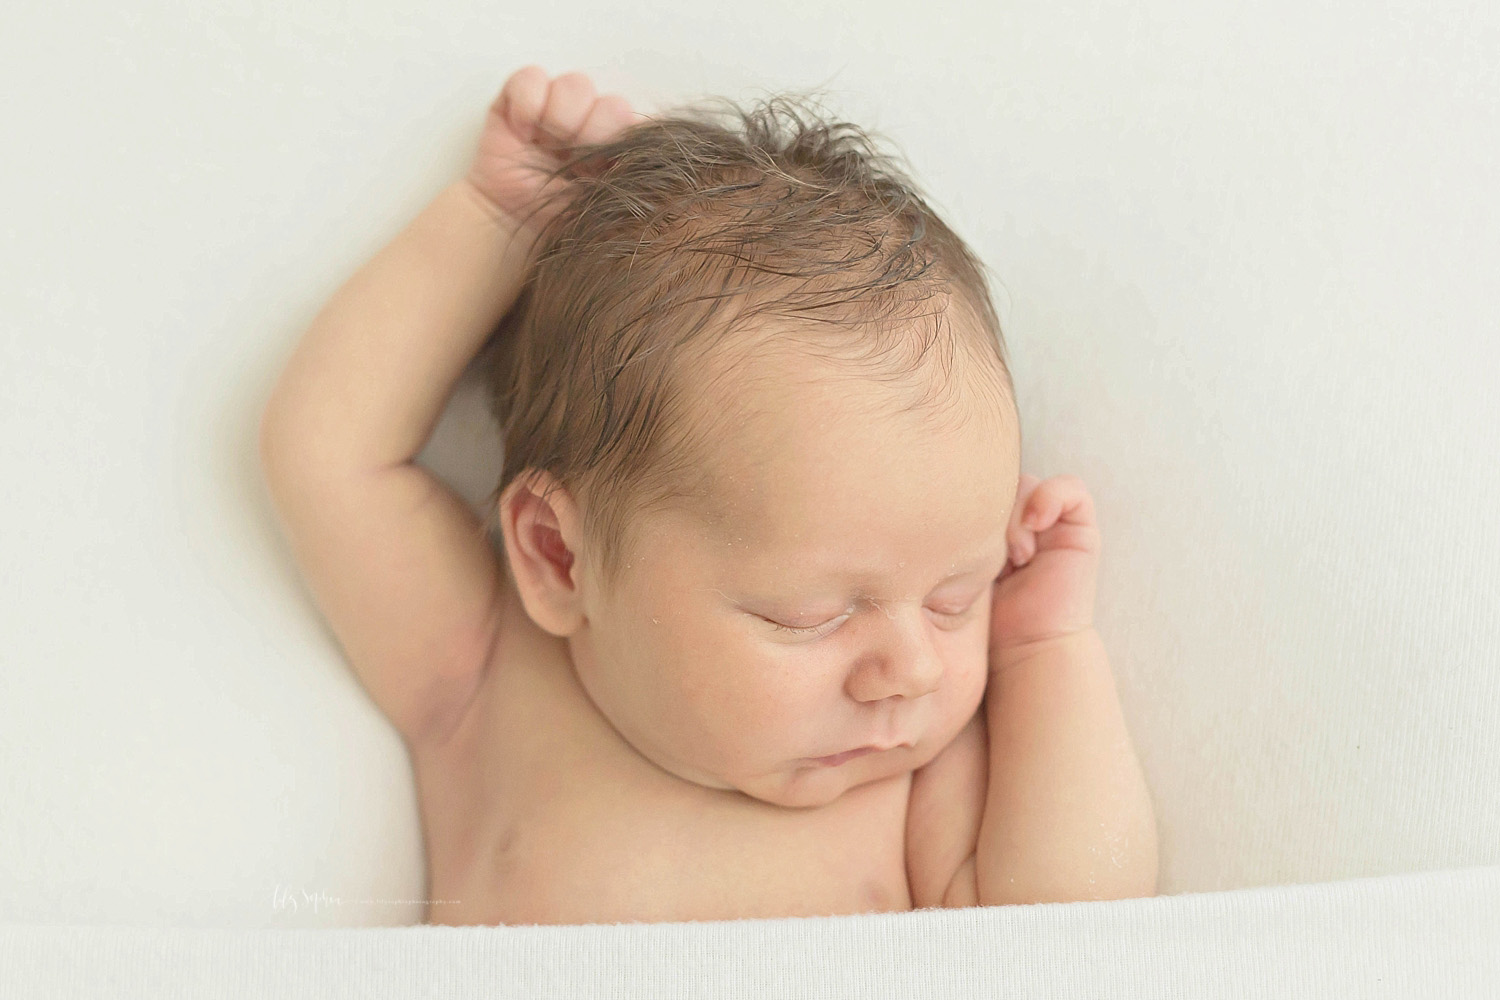  Image of baby, newborn, boy, sleeping on his back, with his hands above his head.&nbsp; 